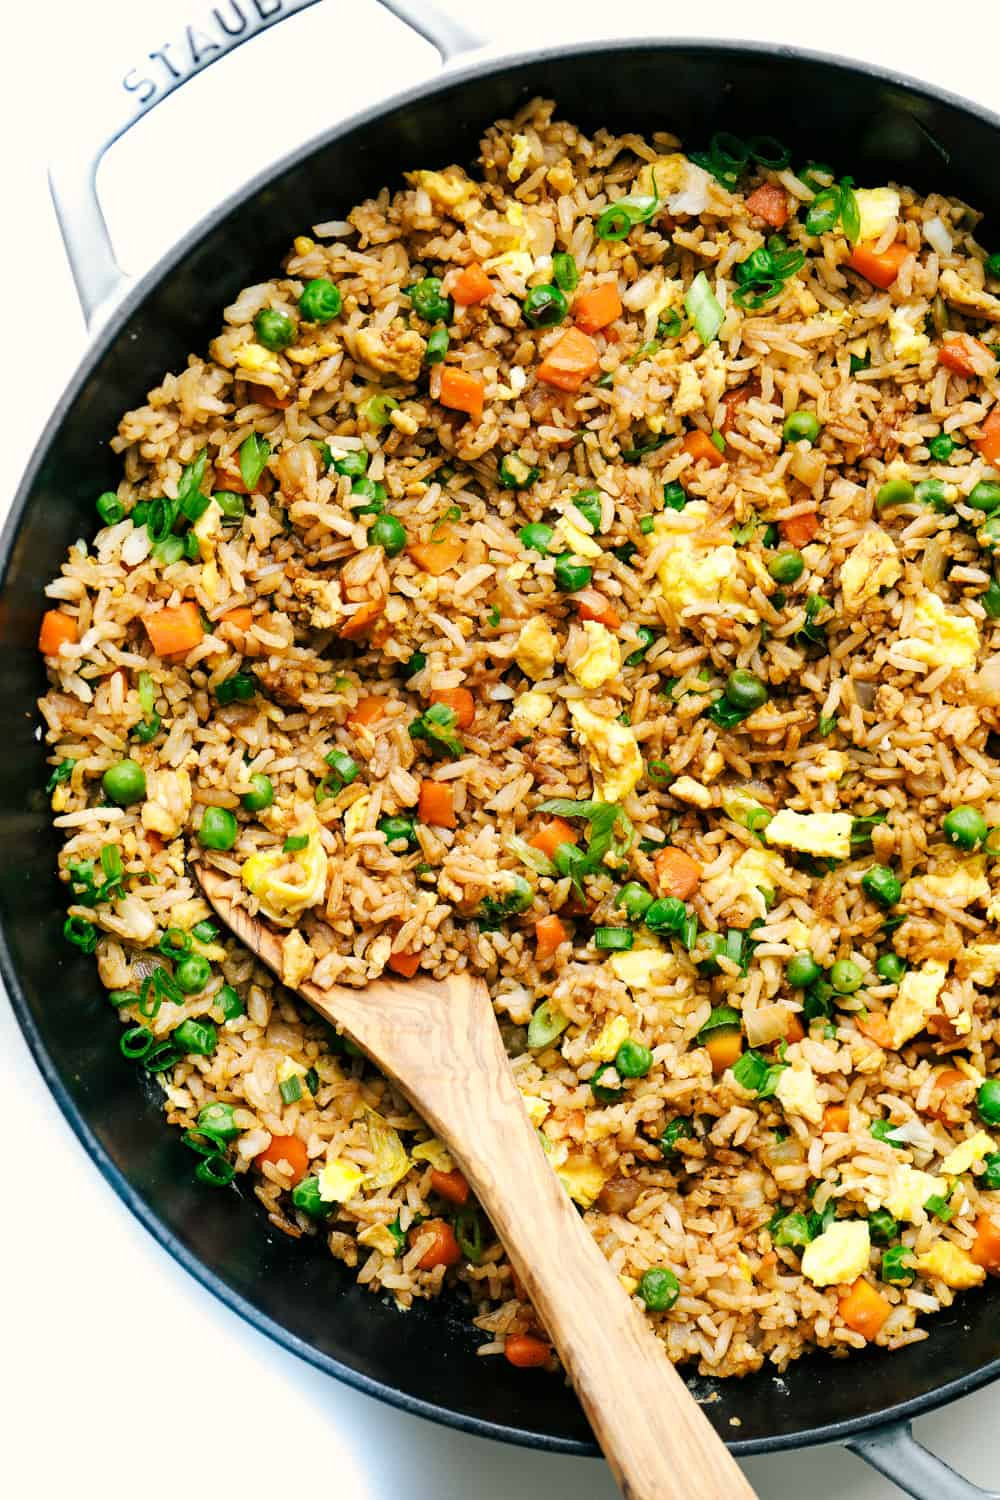 Chinese Fried Rice Recipe Easy
 Easy Fried Rice